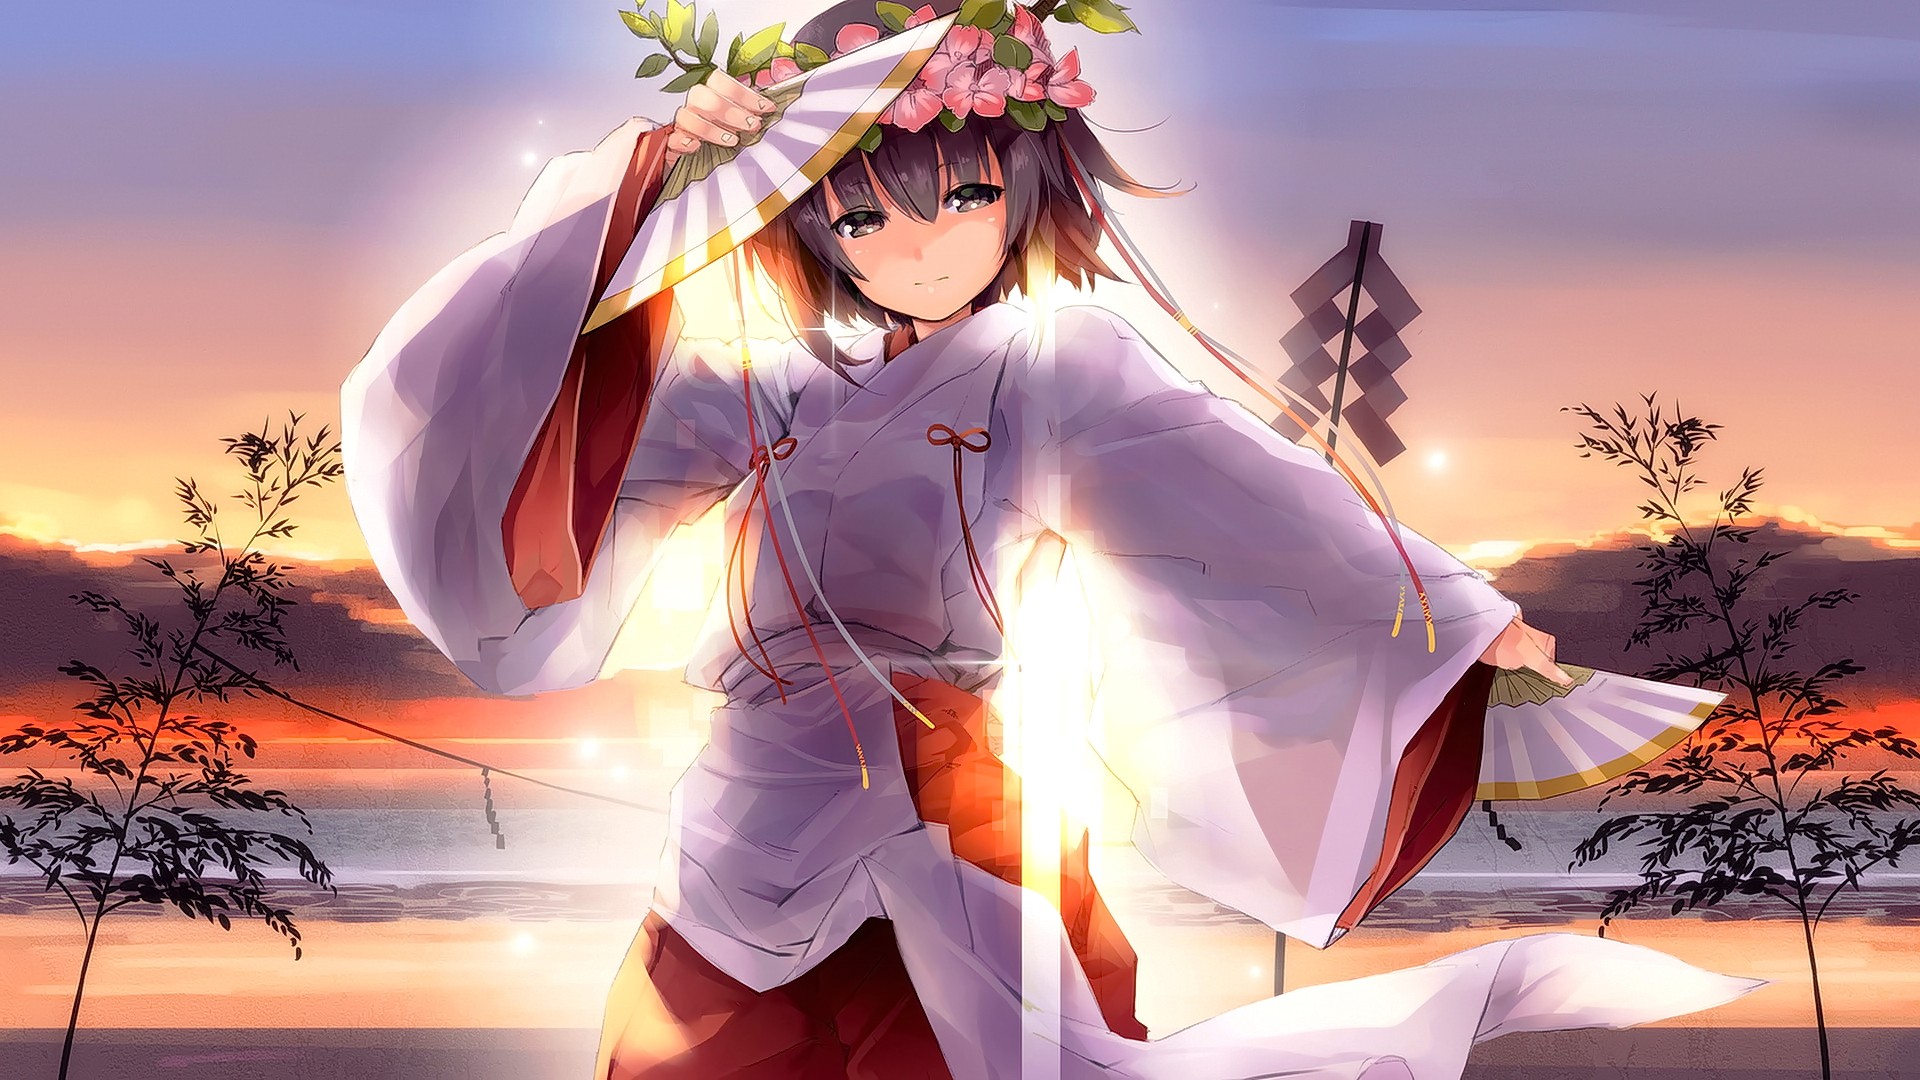 Anime 1920x1080 anime anime girls brunette gray eyes Japanese clothes landscape water sky clouds smiling looking at viewer flower crown fantasy art fantasy girl fans shoulder length hair sunlight women outdoors traditional clothing